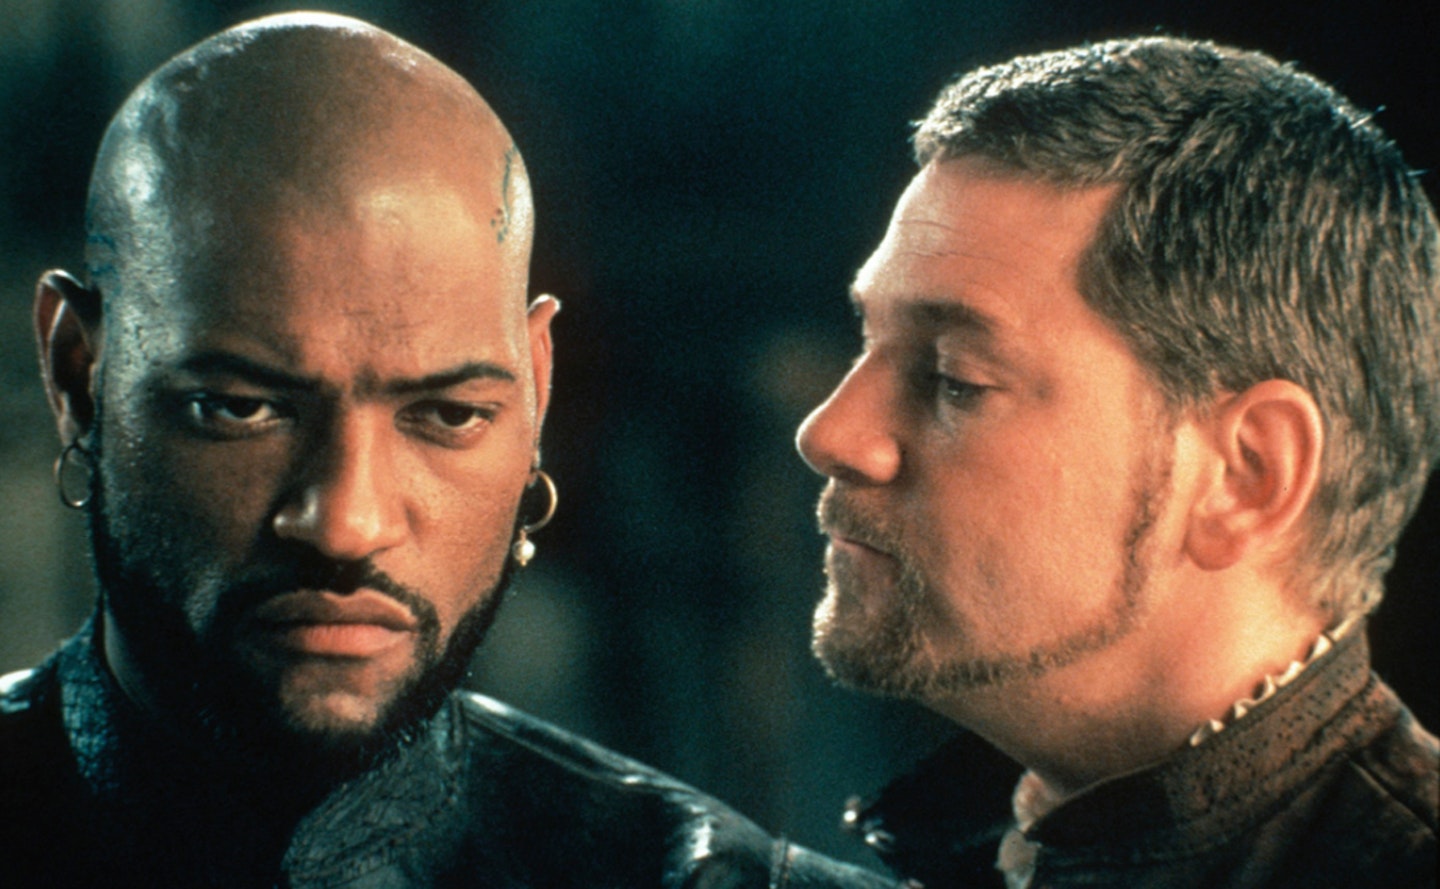 Kenneth Branagh and Laurence Fishburne in Othello